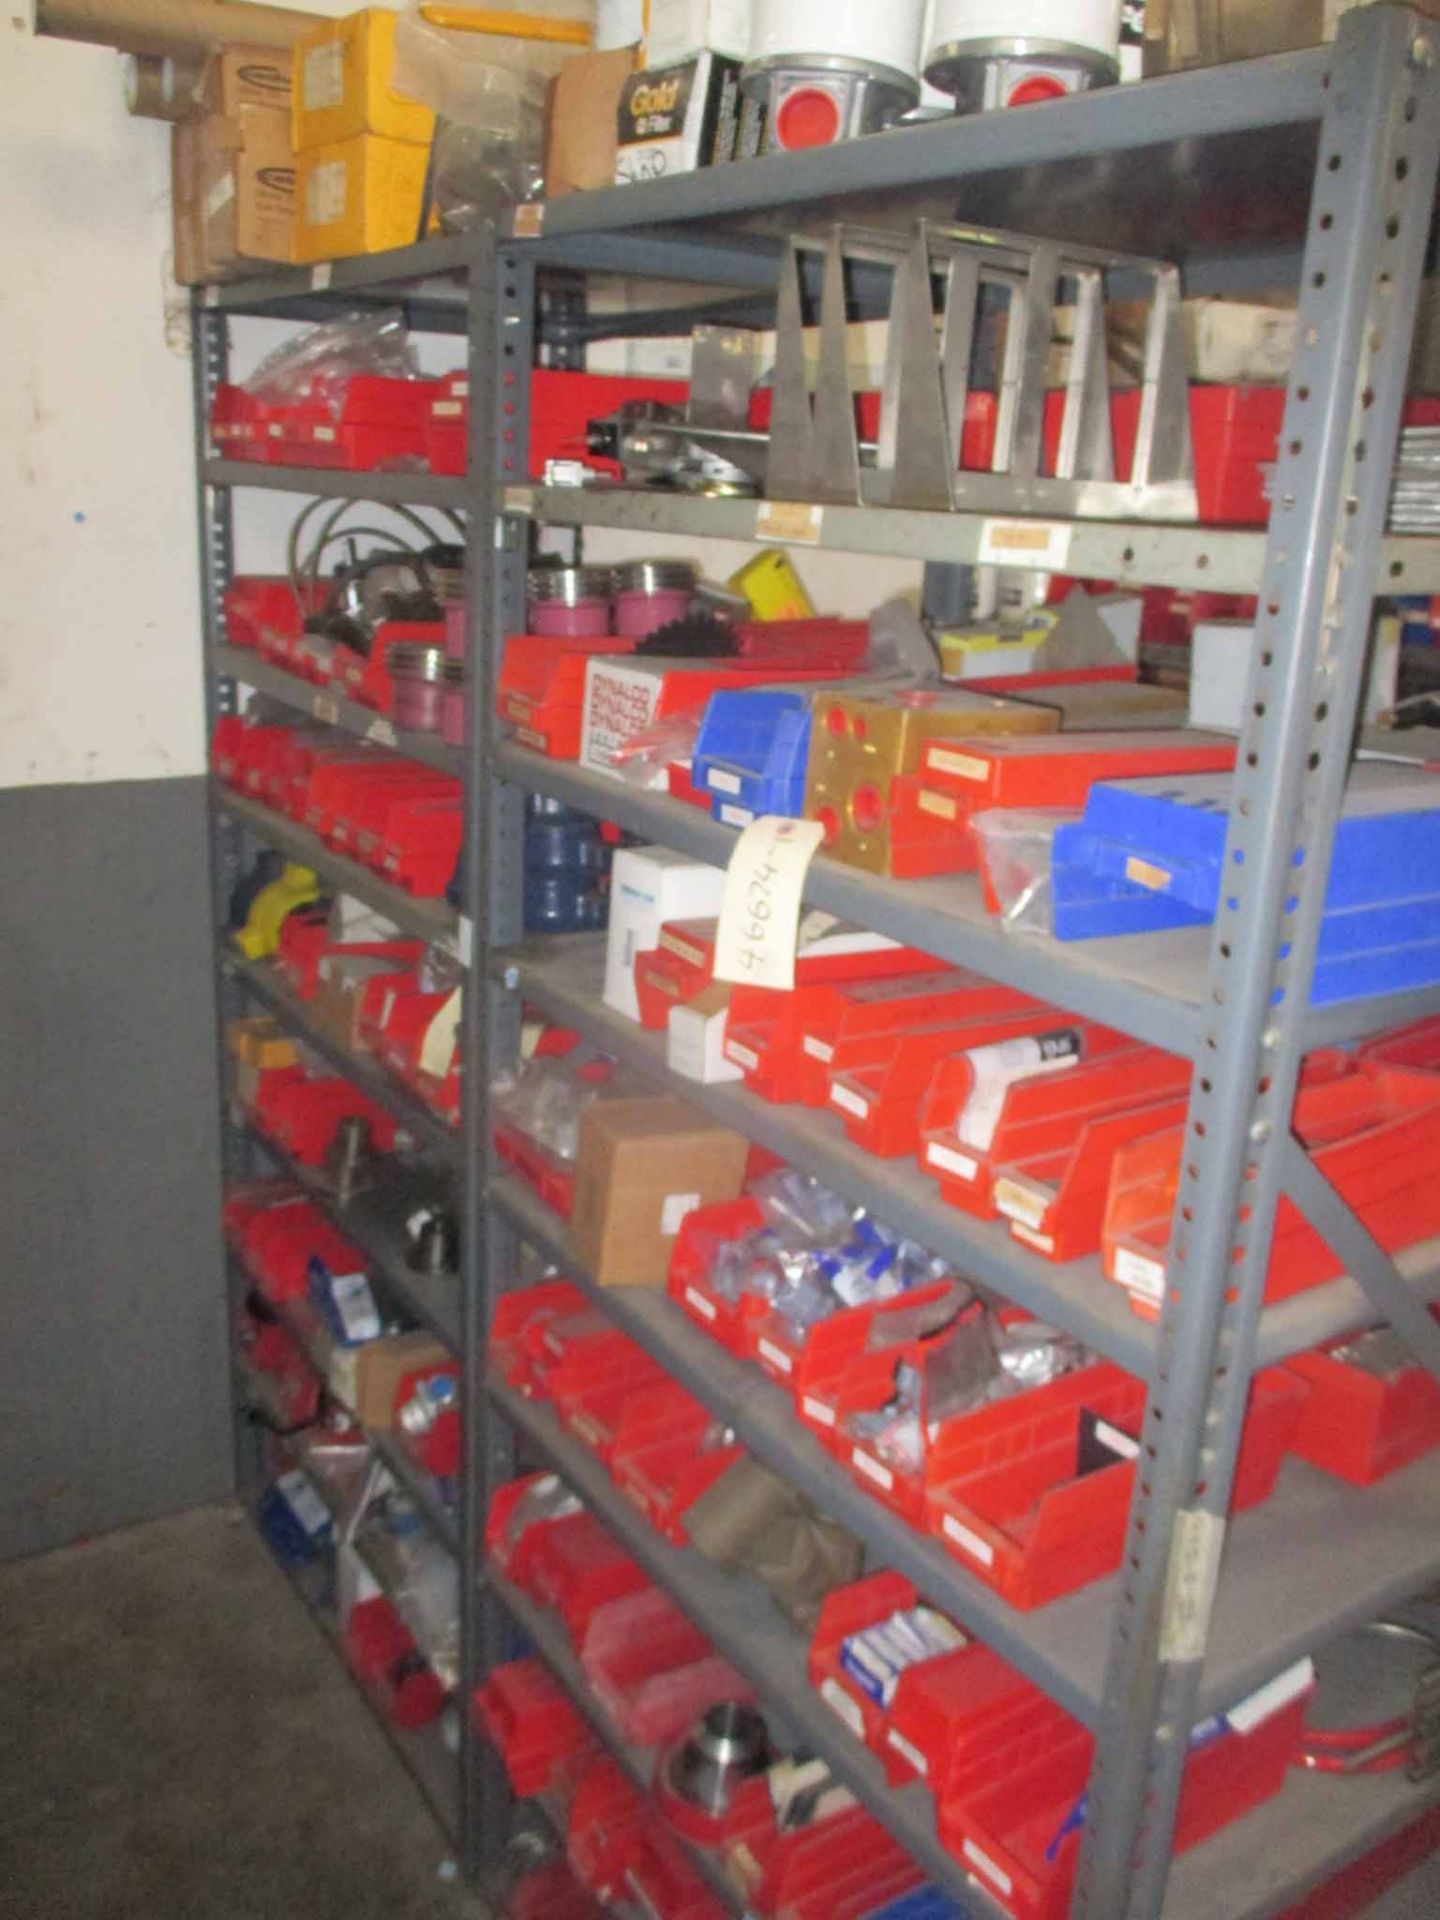 LOT OF SPARE PARTS FOR NITROGEN UNITS, new (on enclosed shelf)